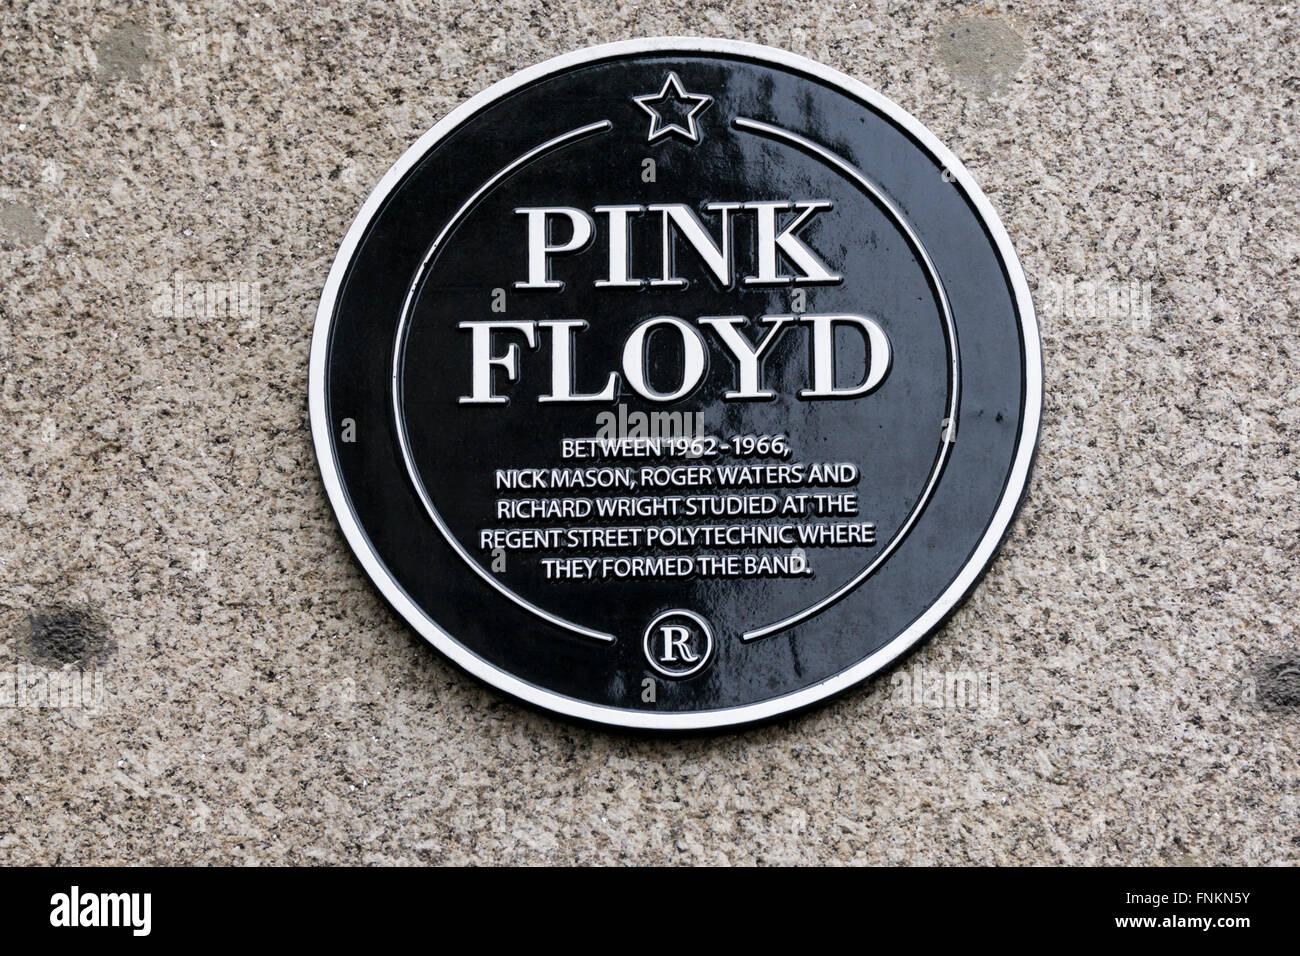 Plaque commemorating the formation of Pink Floyd by Nick Mason, Roger Waters and Richard Wright at Regent Street Poly in 1960s. Stock Photo